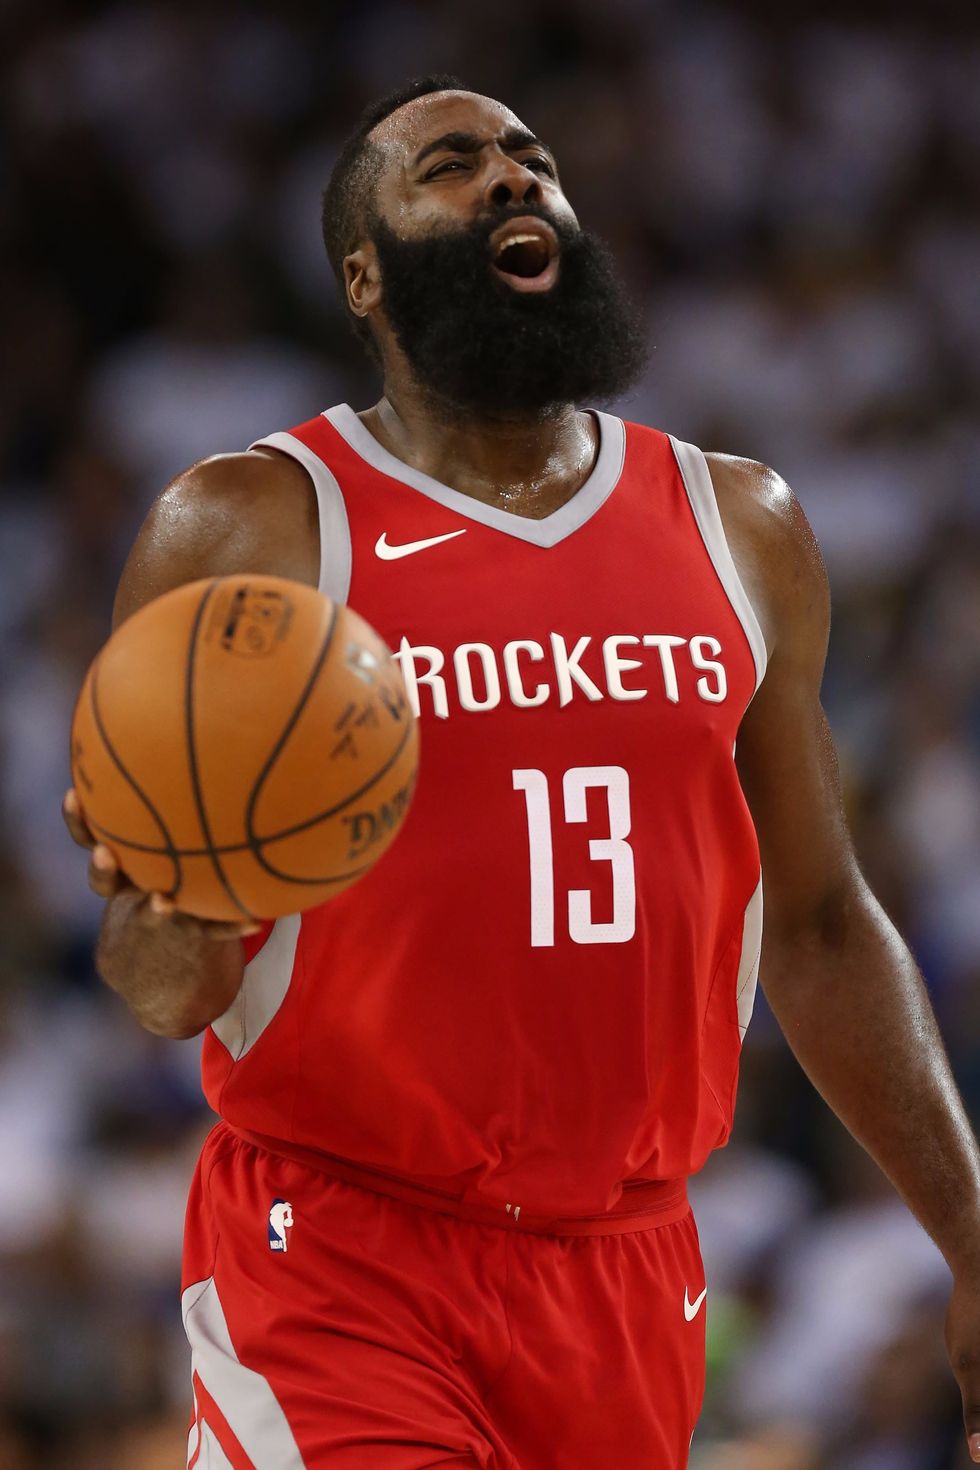 An early look at the Rockets vs. Jazz NBA playoff series